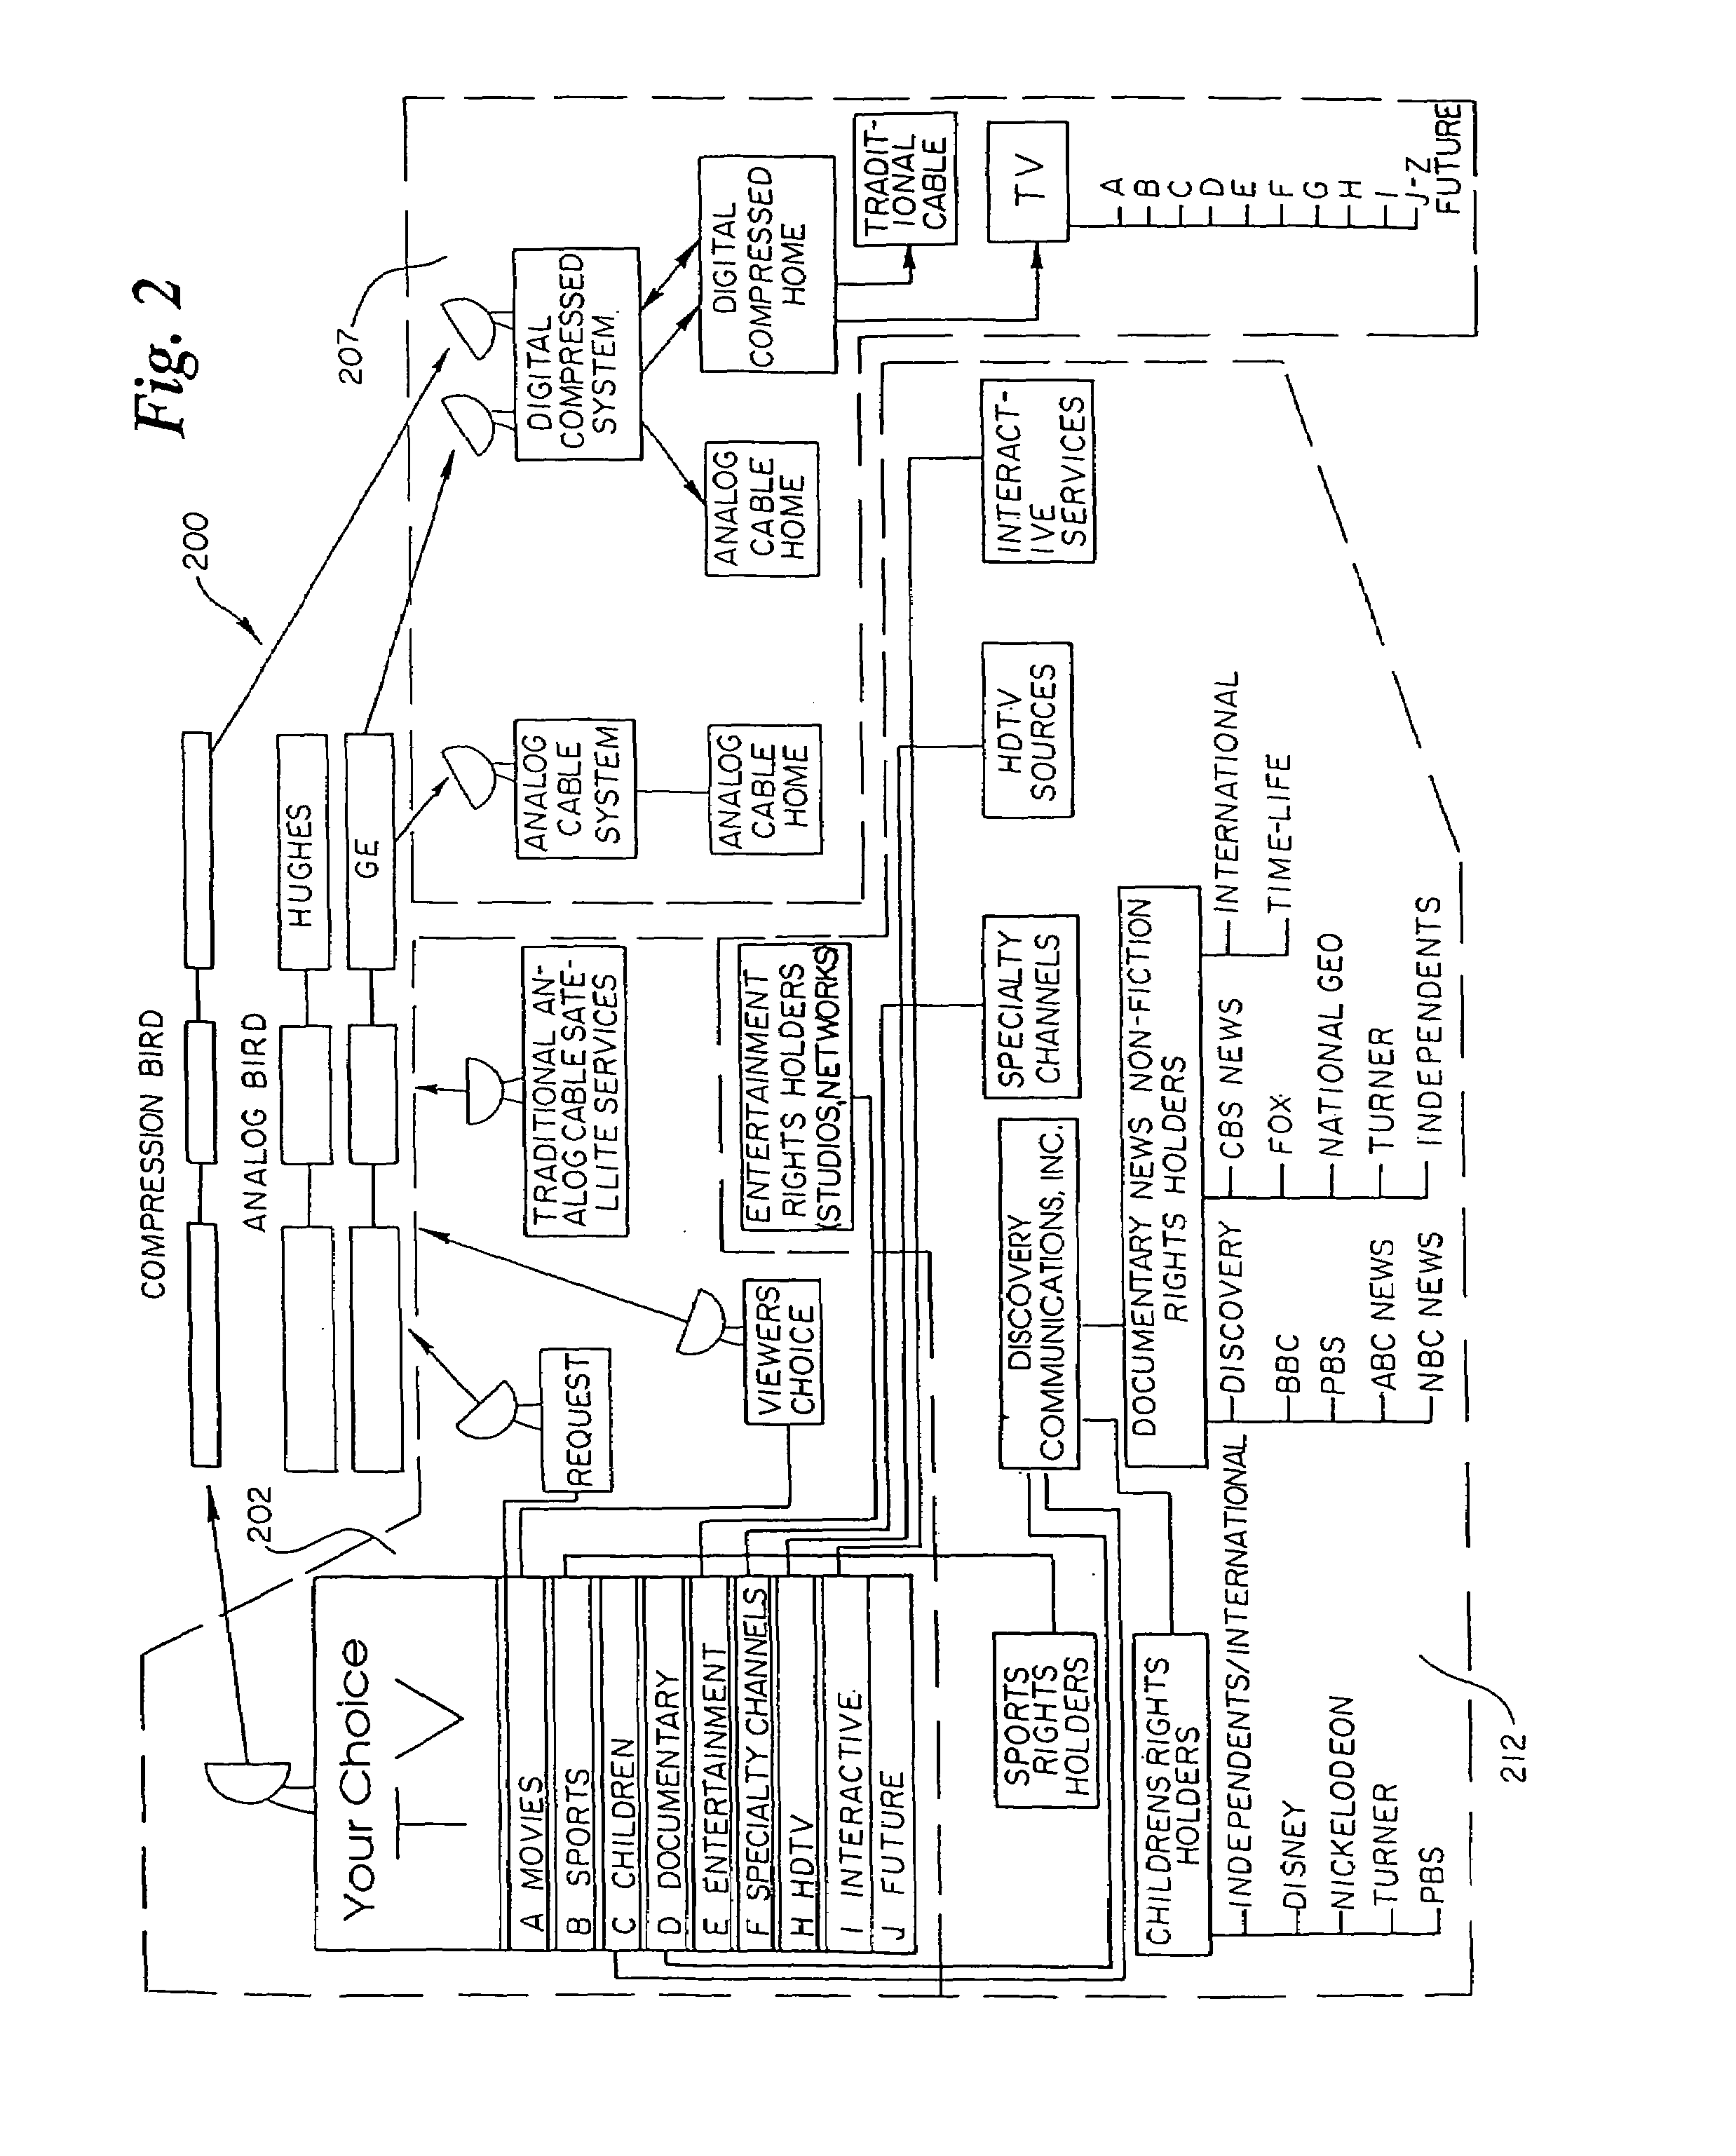 Method and apparatus for gathering programs watched data